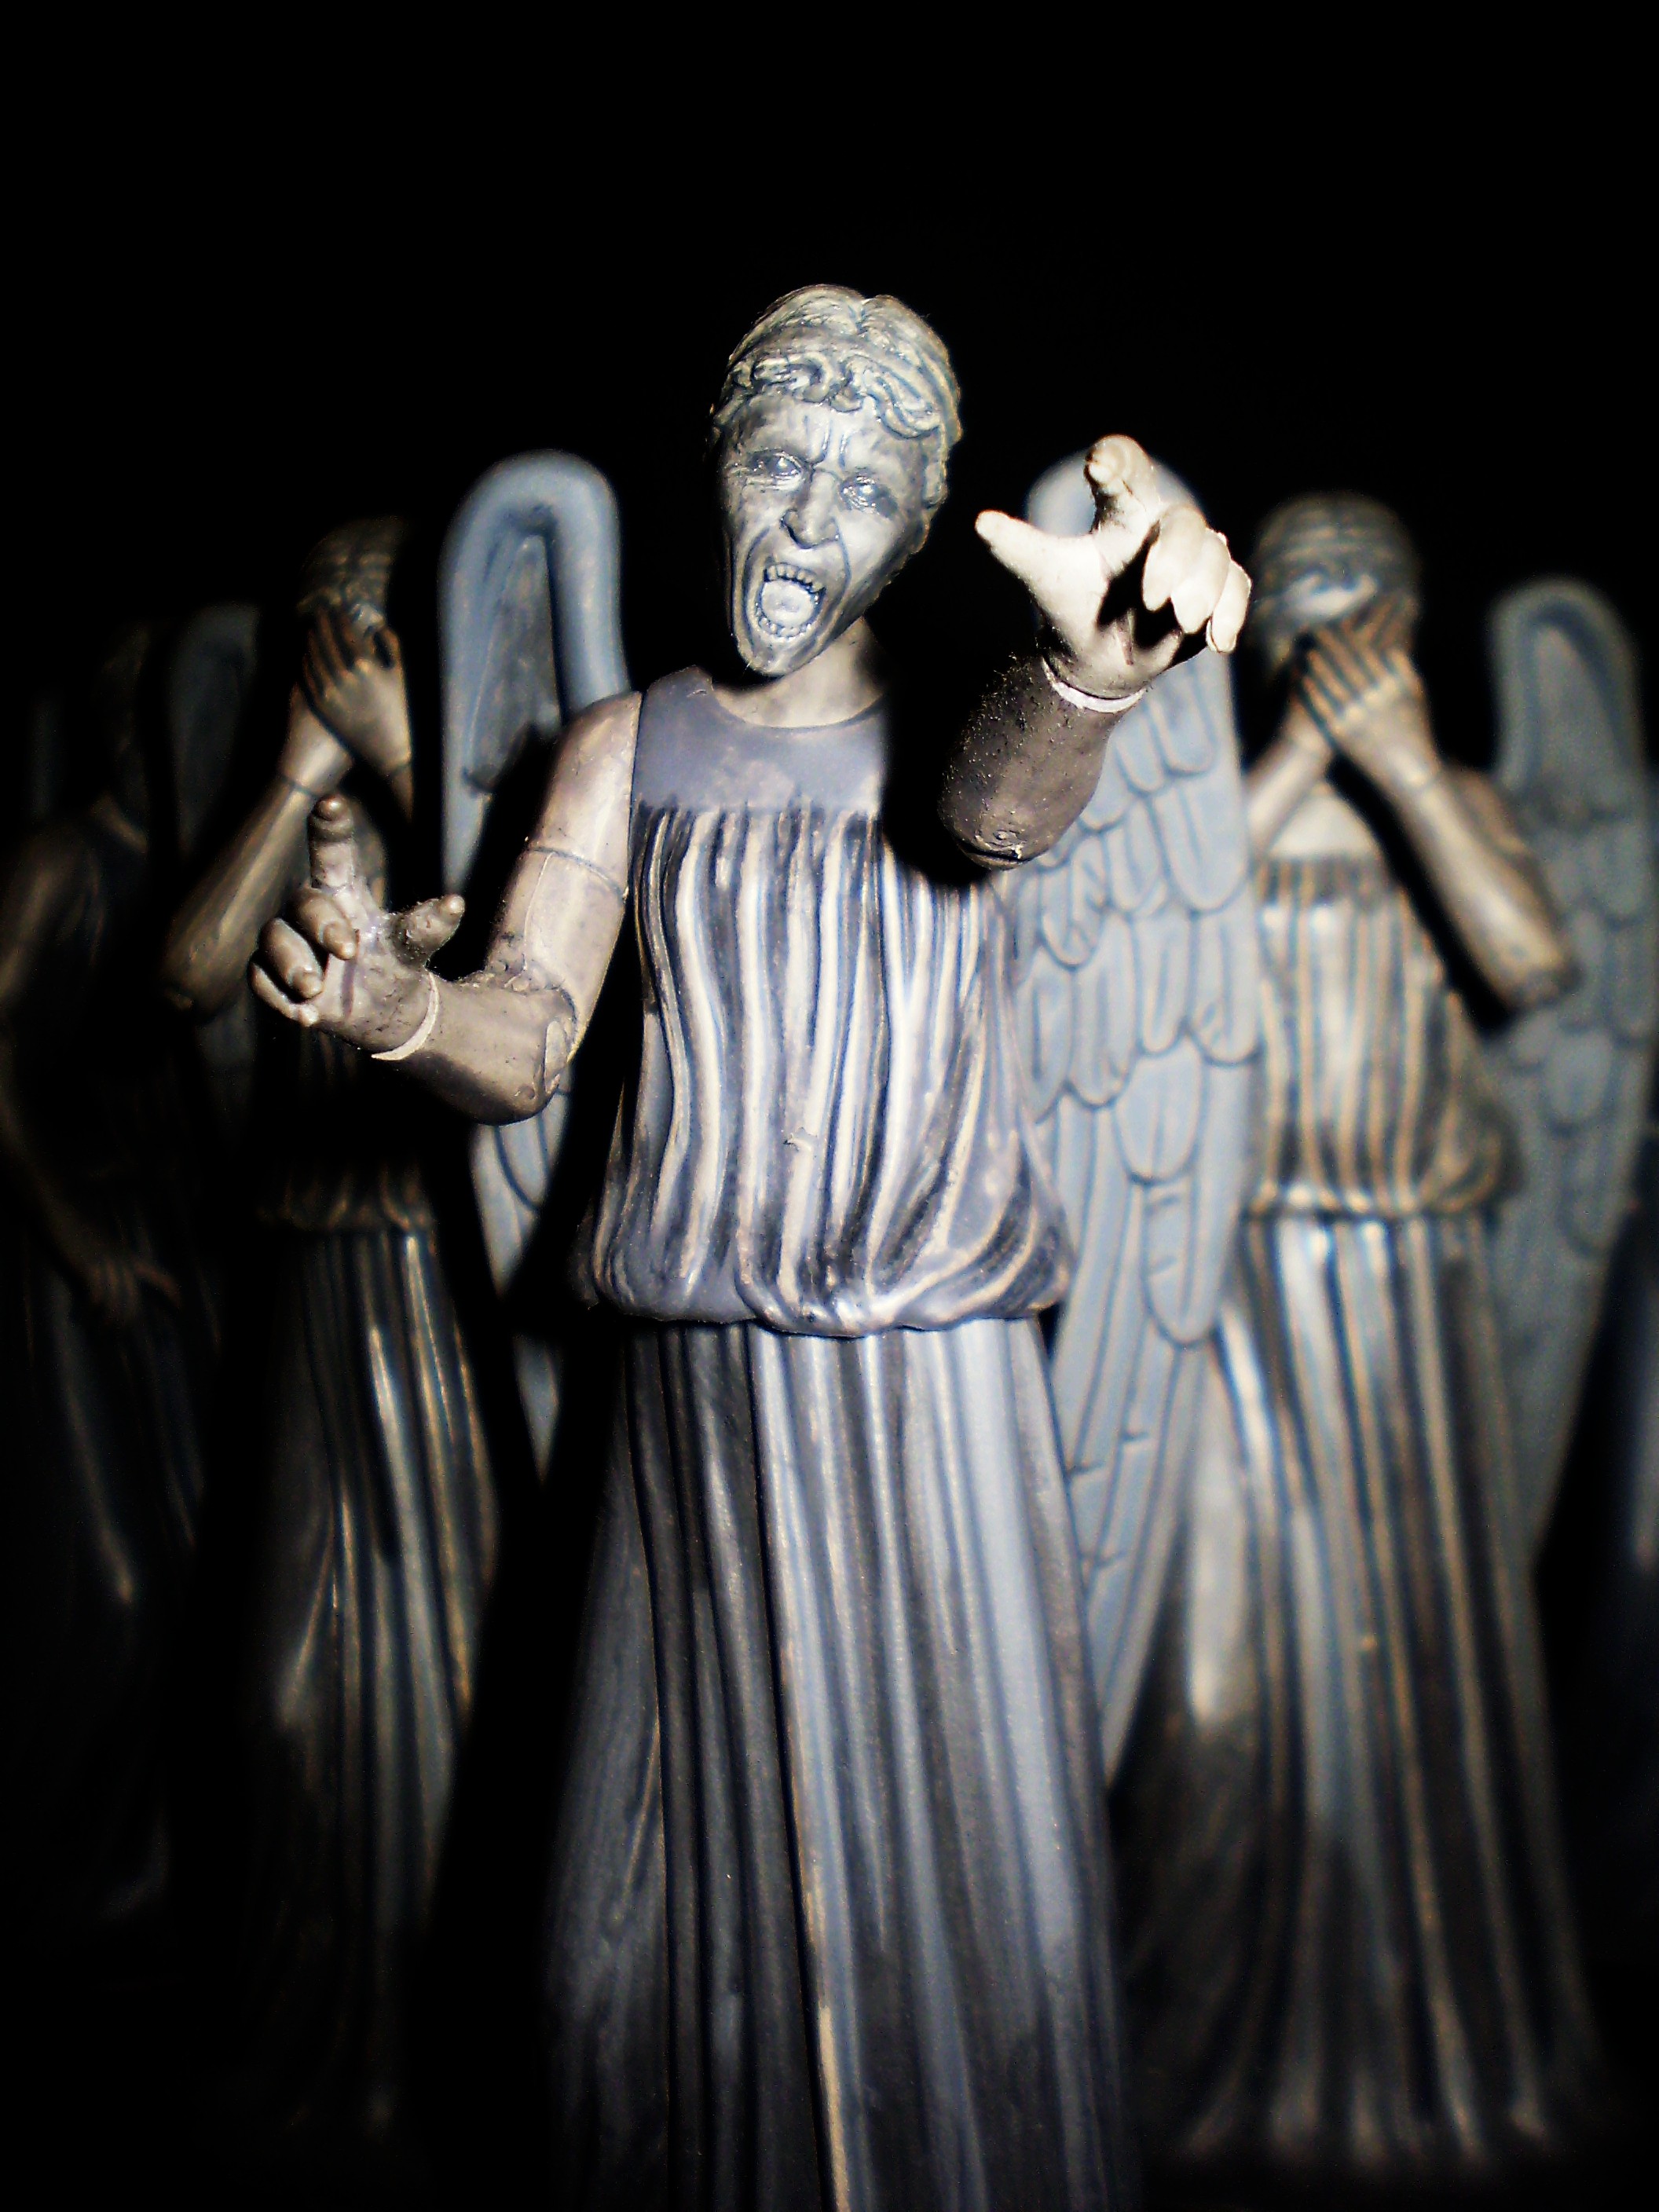 Weeping Angel Wallpaper Moving Screen 771h3b6 Mb Picserio